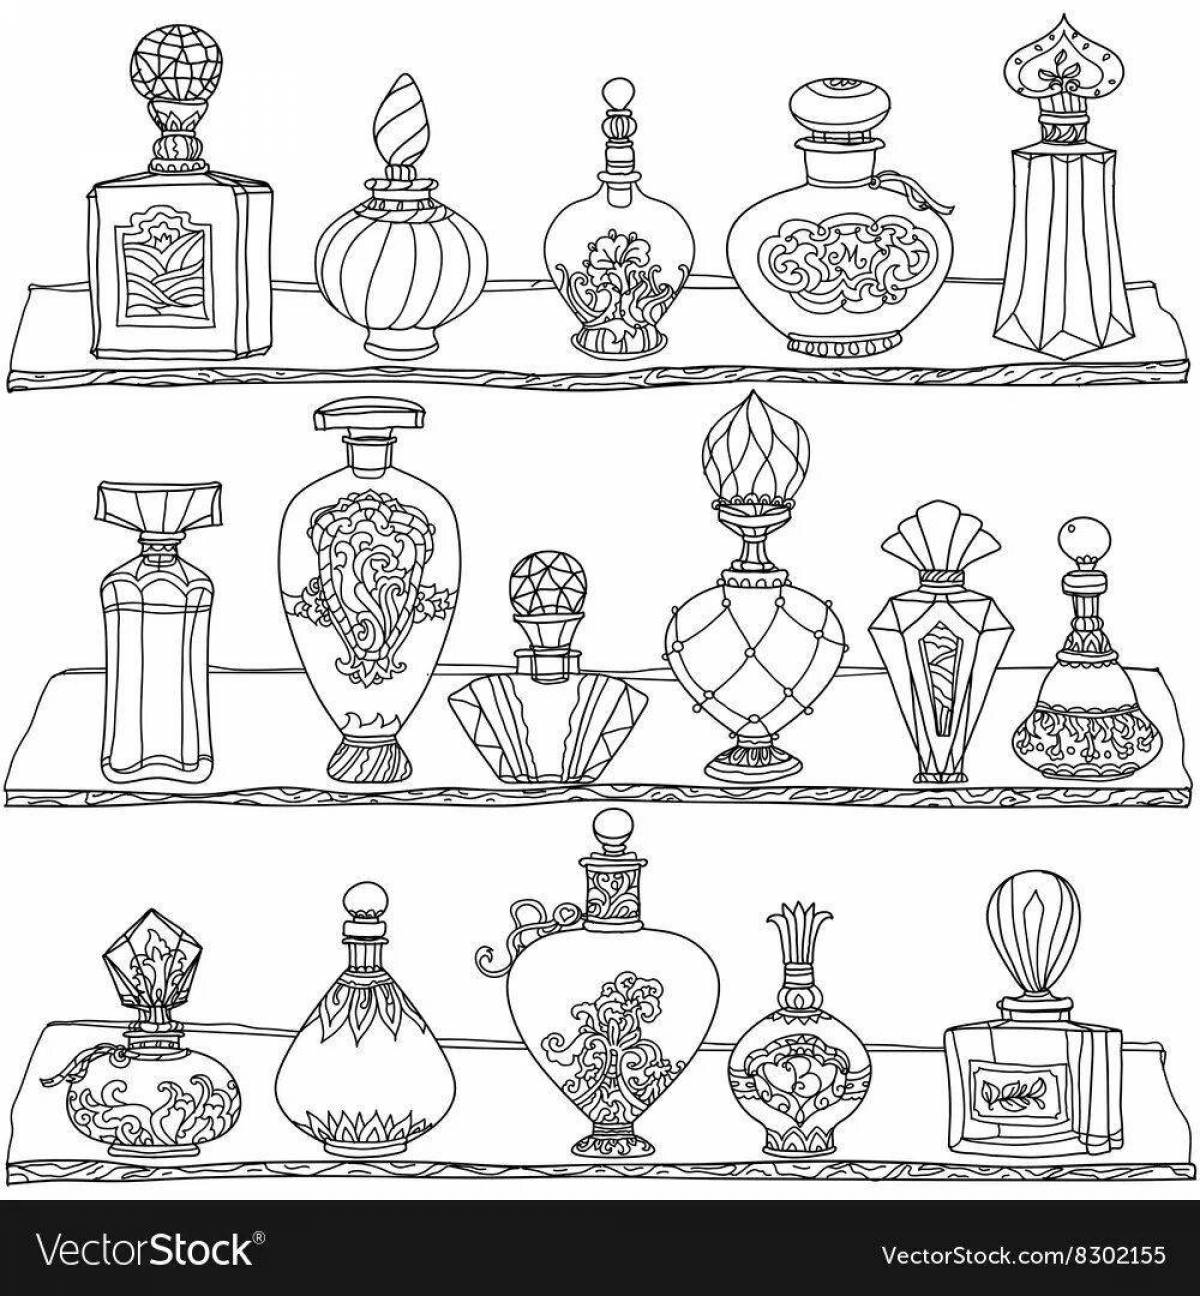 Adorable perfume coloring page for preschoolers